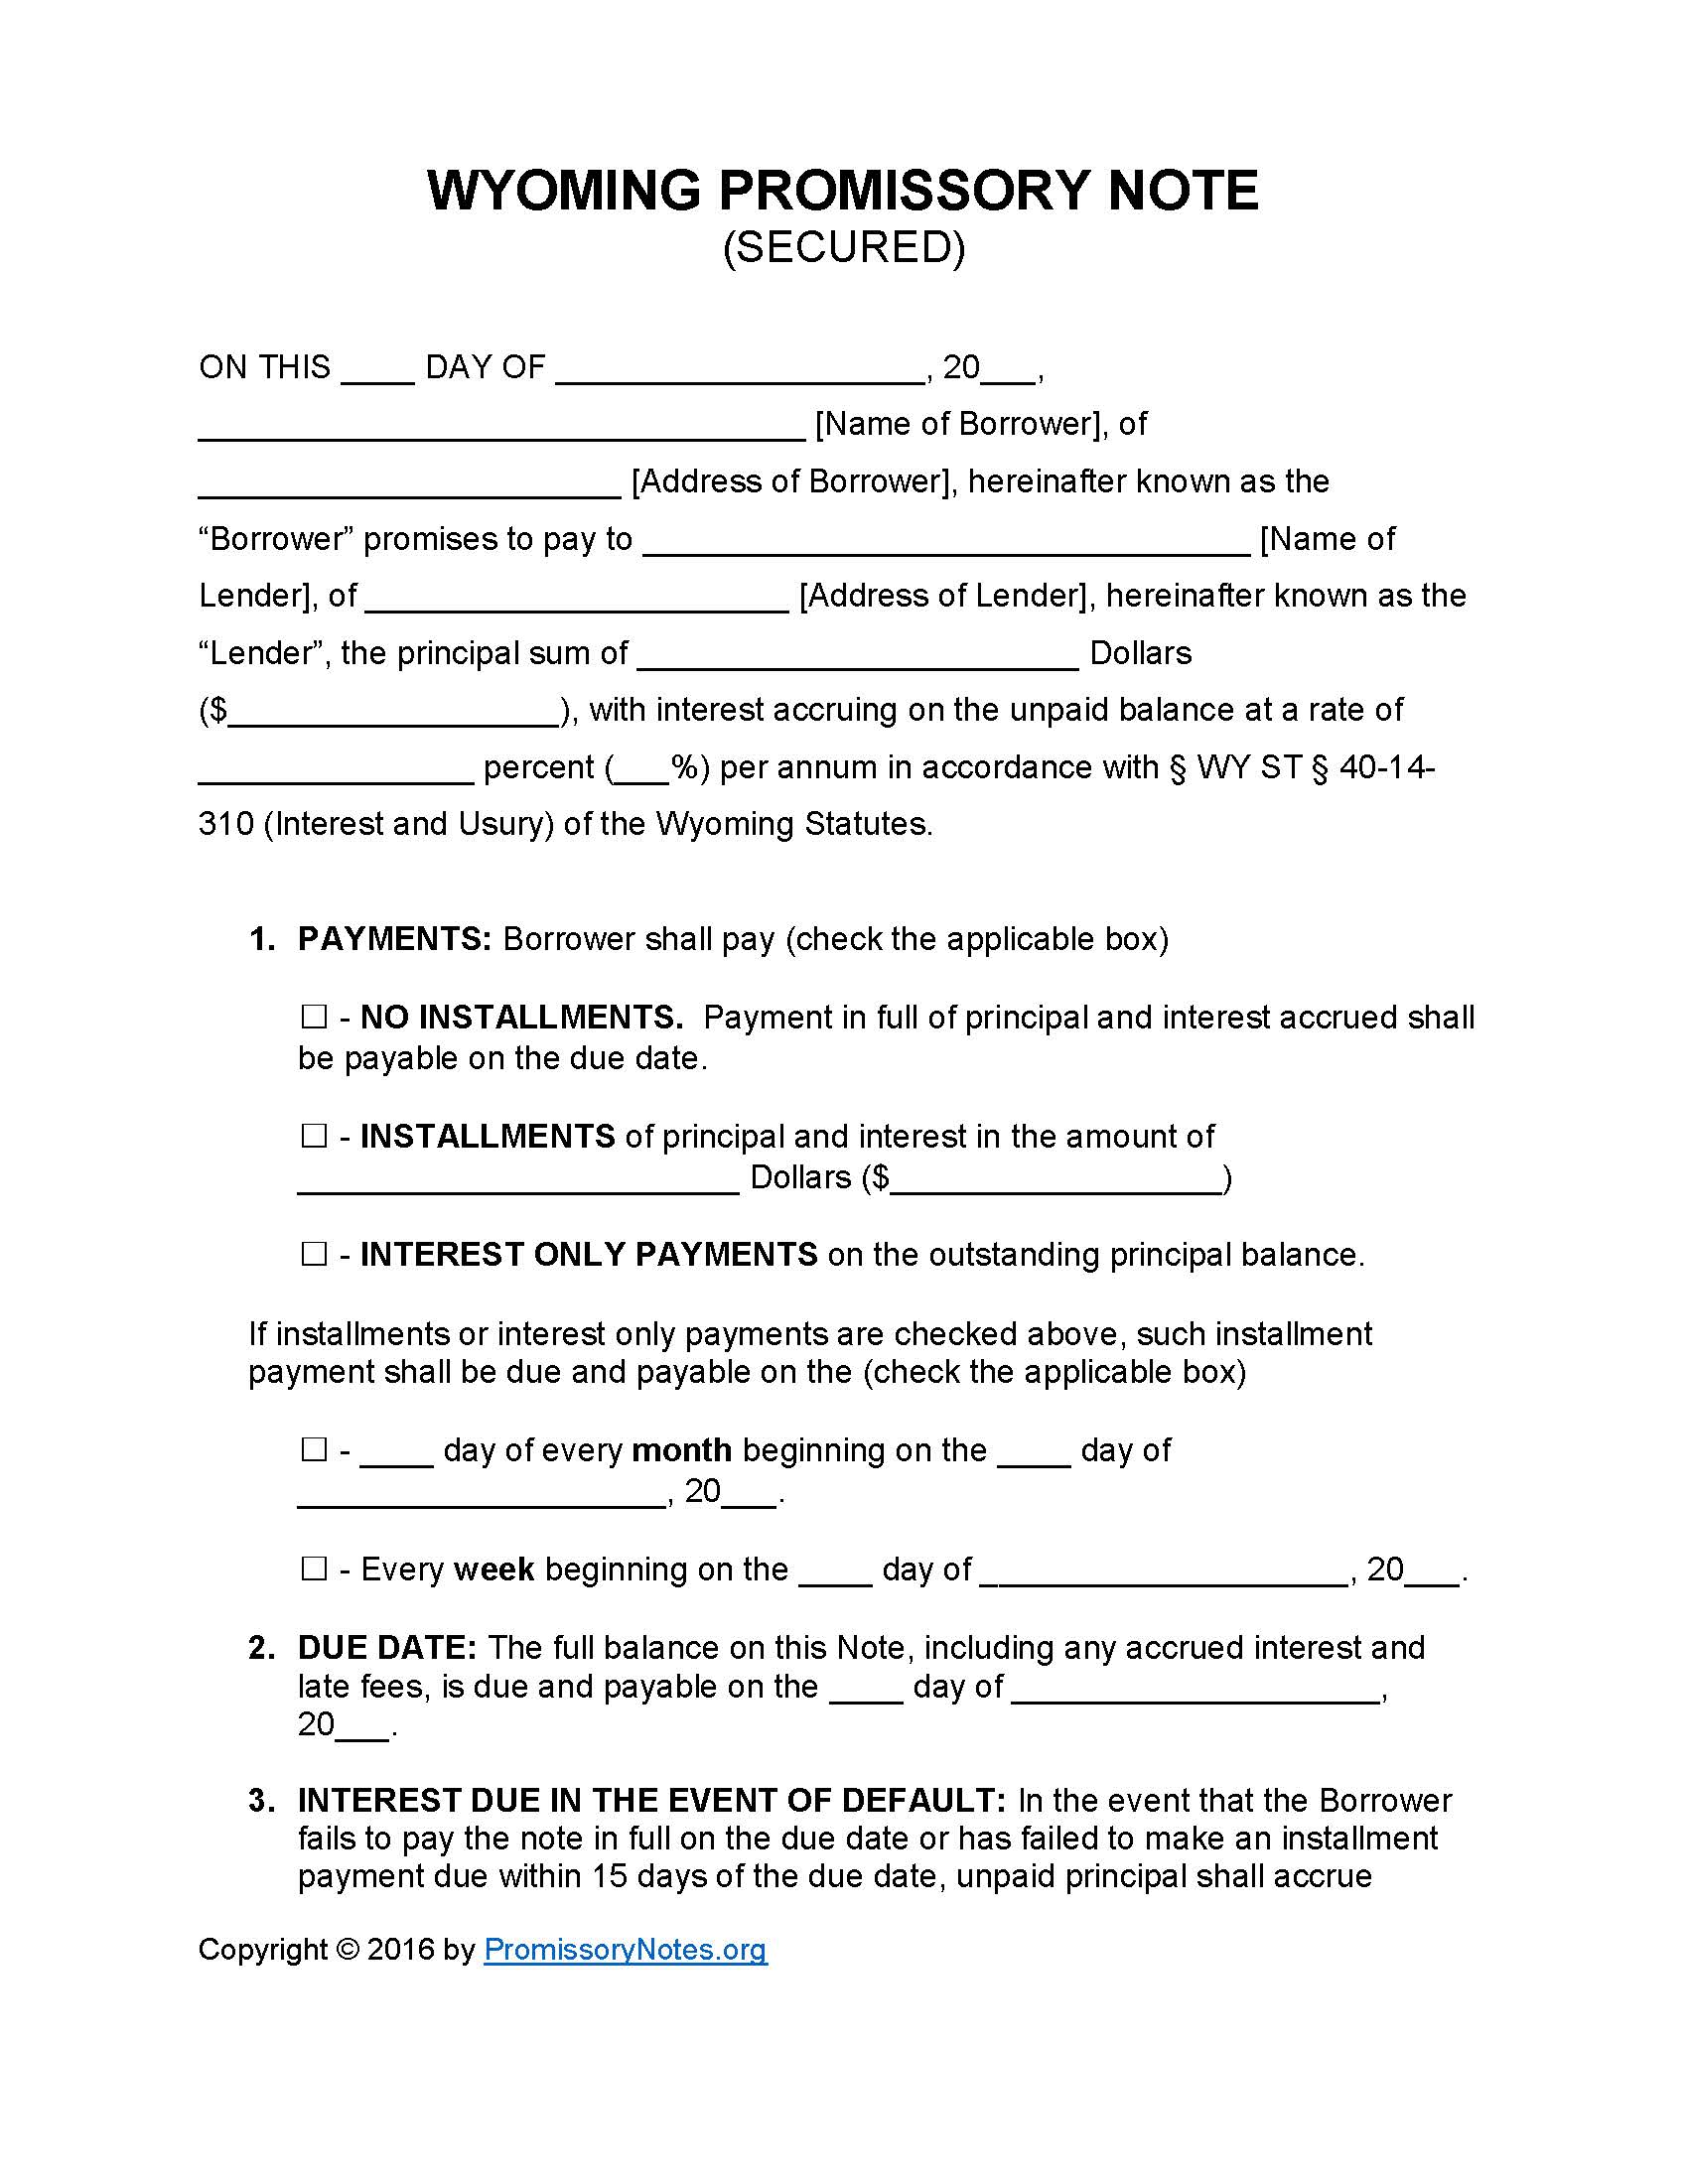 wyoming-secured-promissory-note-form